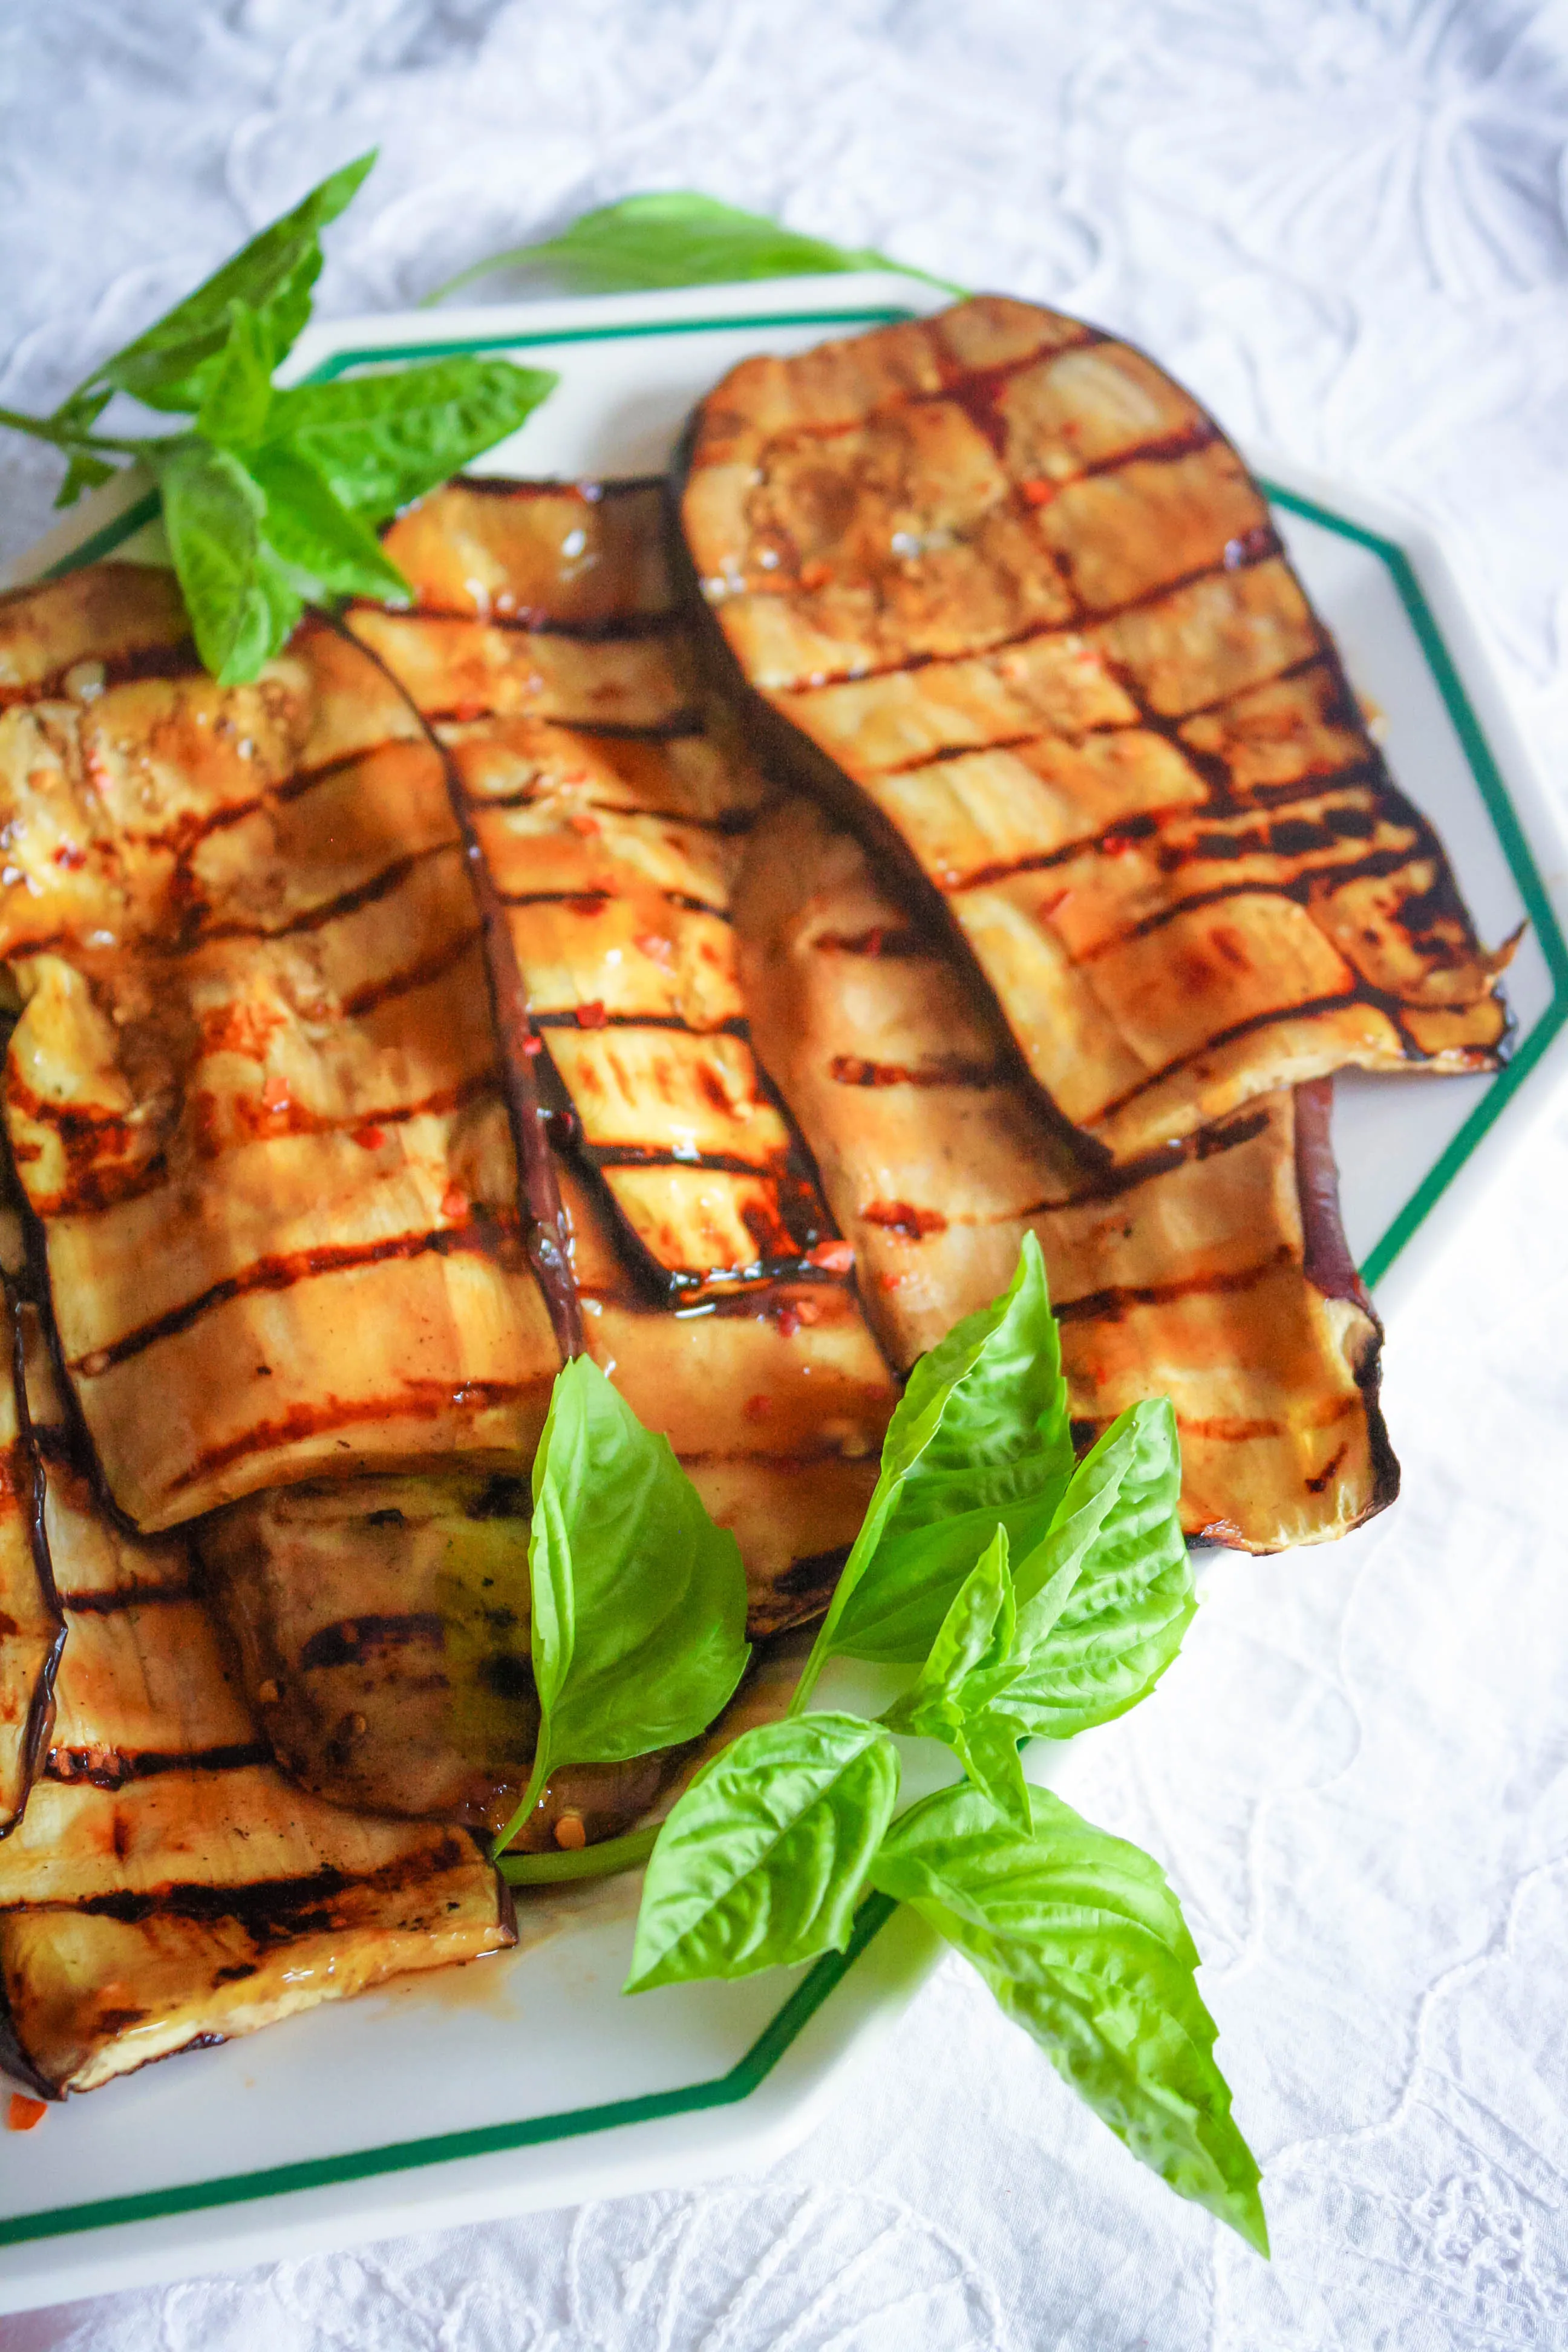 Grilled Eggplant with Teriyaki is a delicious summer dish. Grilled Eggplant with Teriyaki is full of flavor for a fab summer meal.